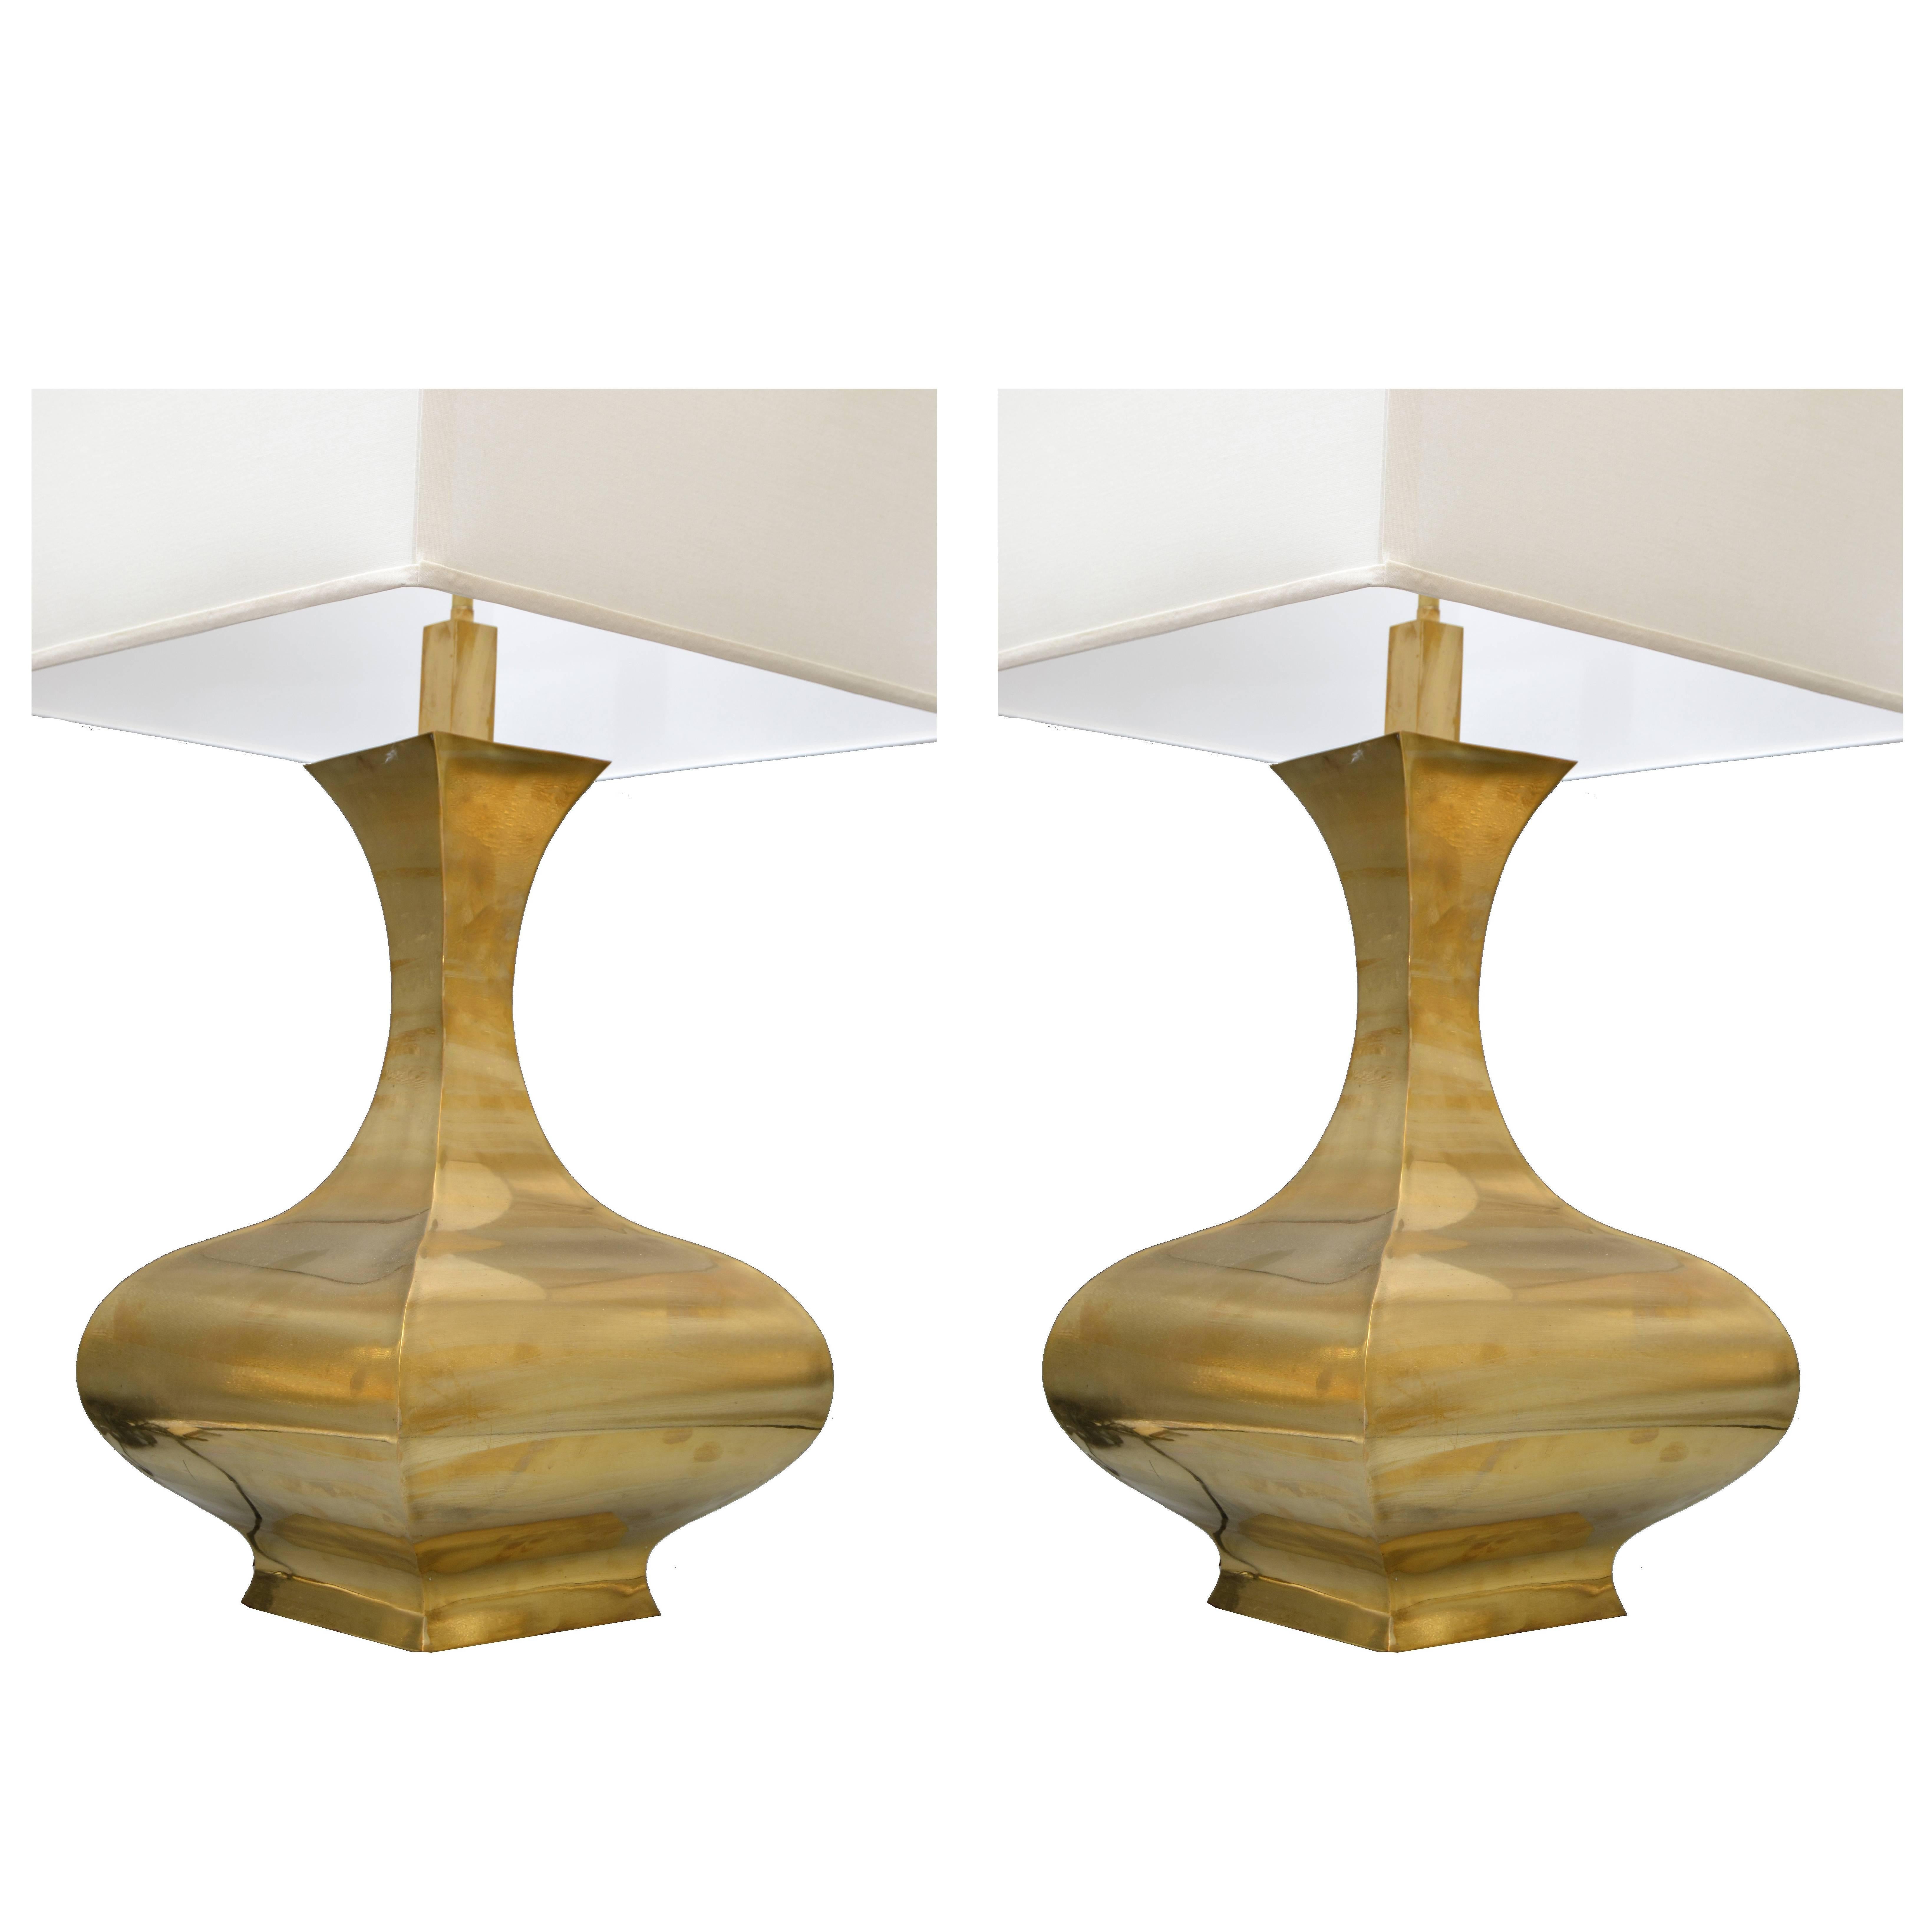 Pair, Tall Solid Brass Vessel Shape Table Lamps Shades Mid-Century Modern 1960s For Sale